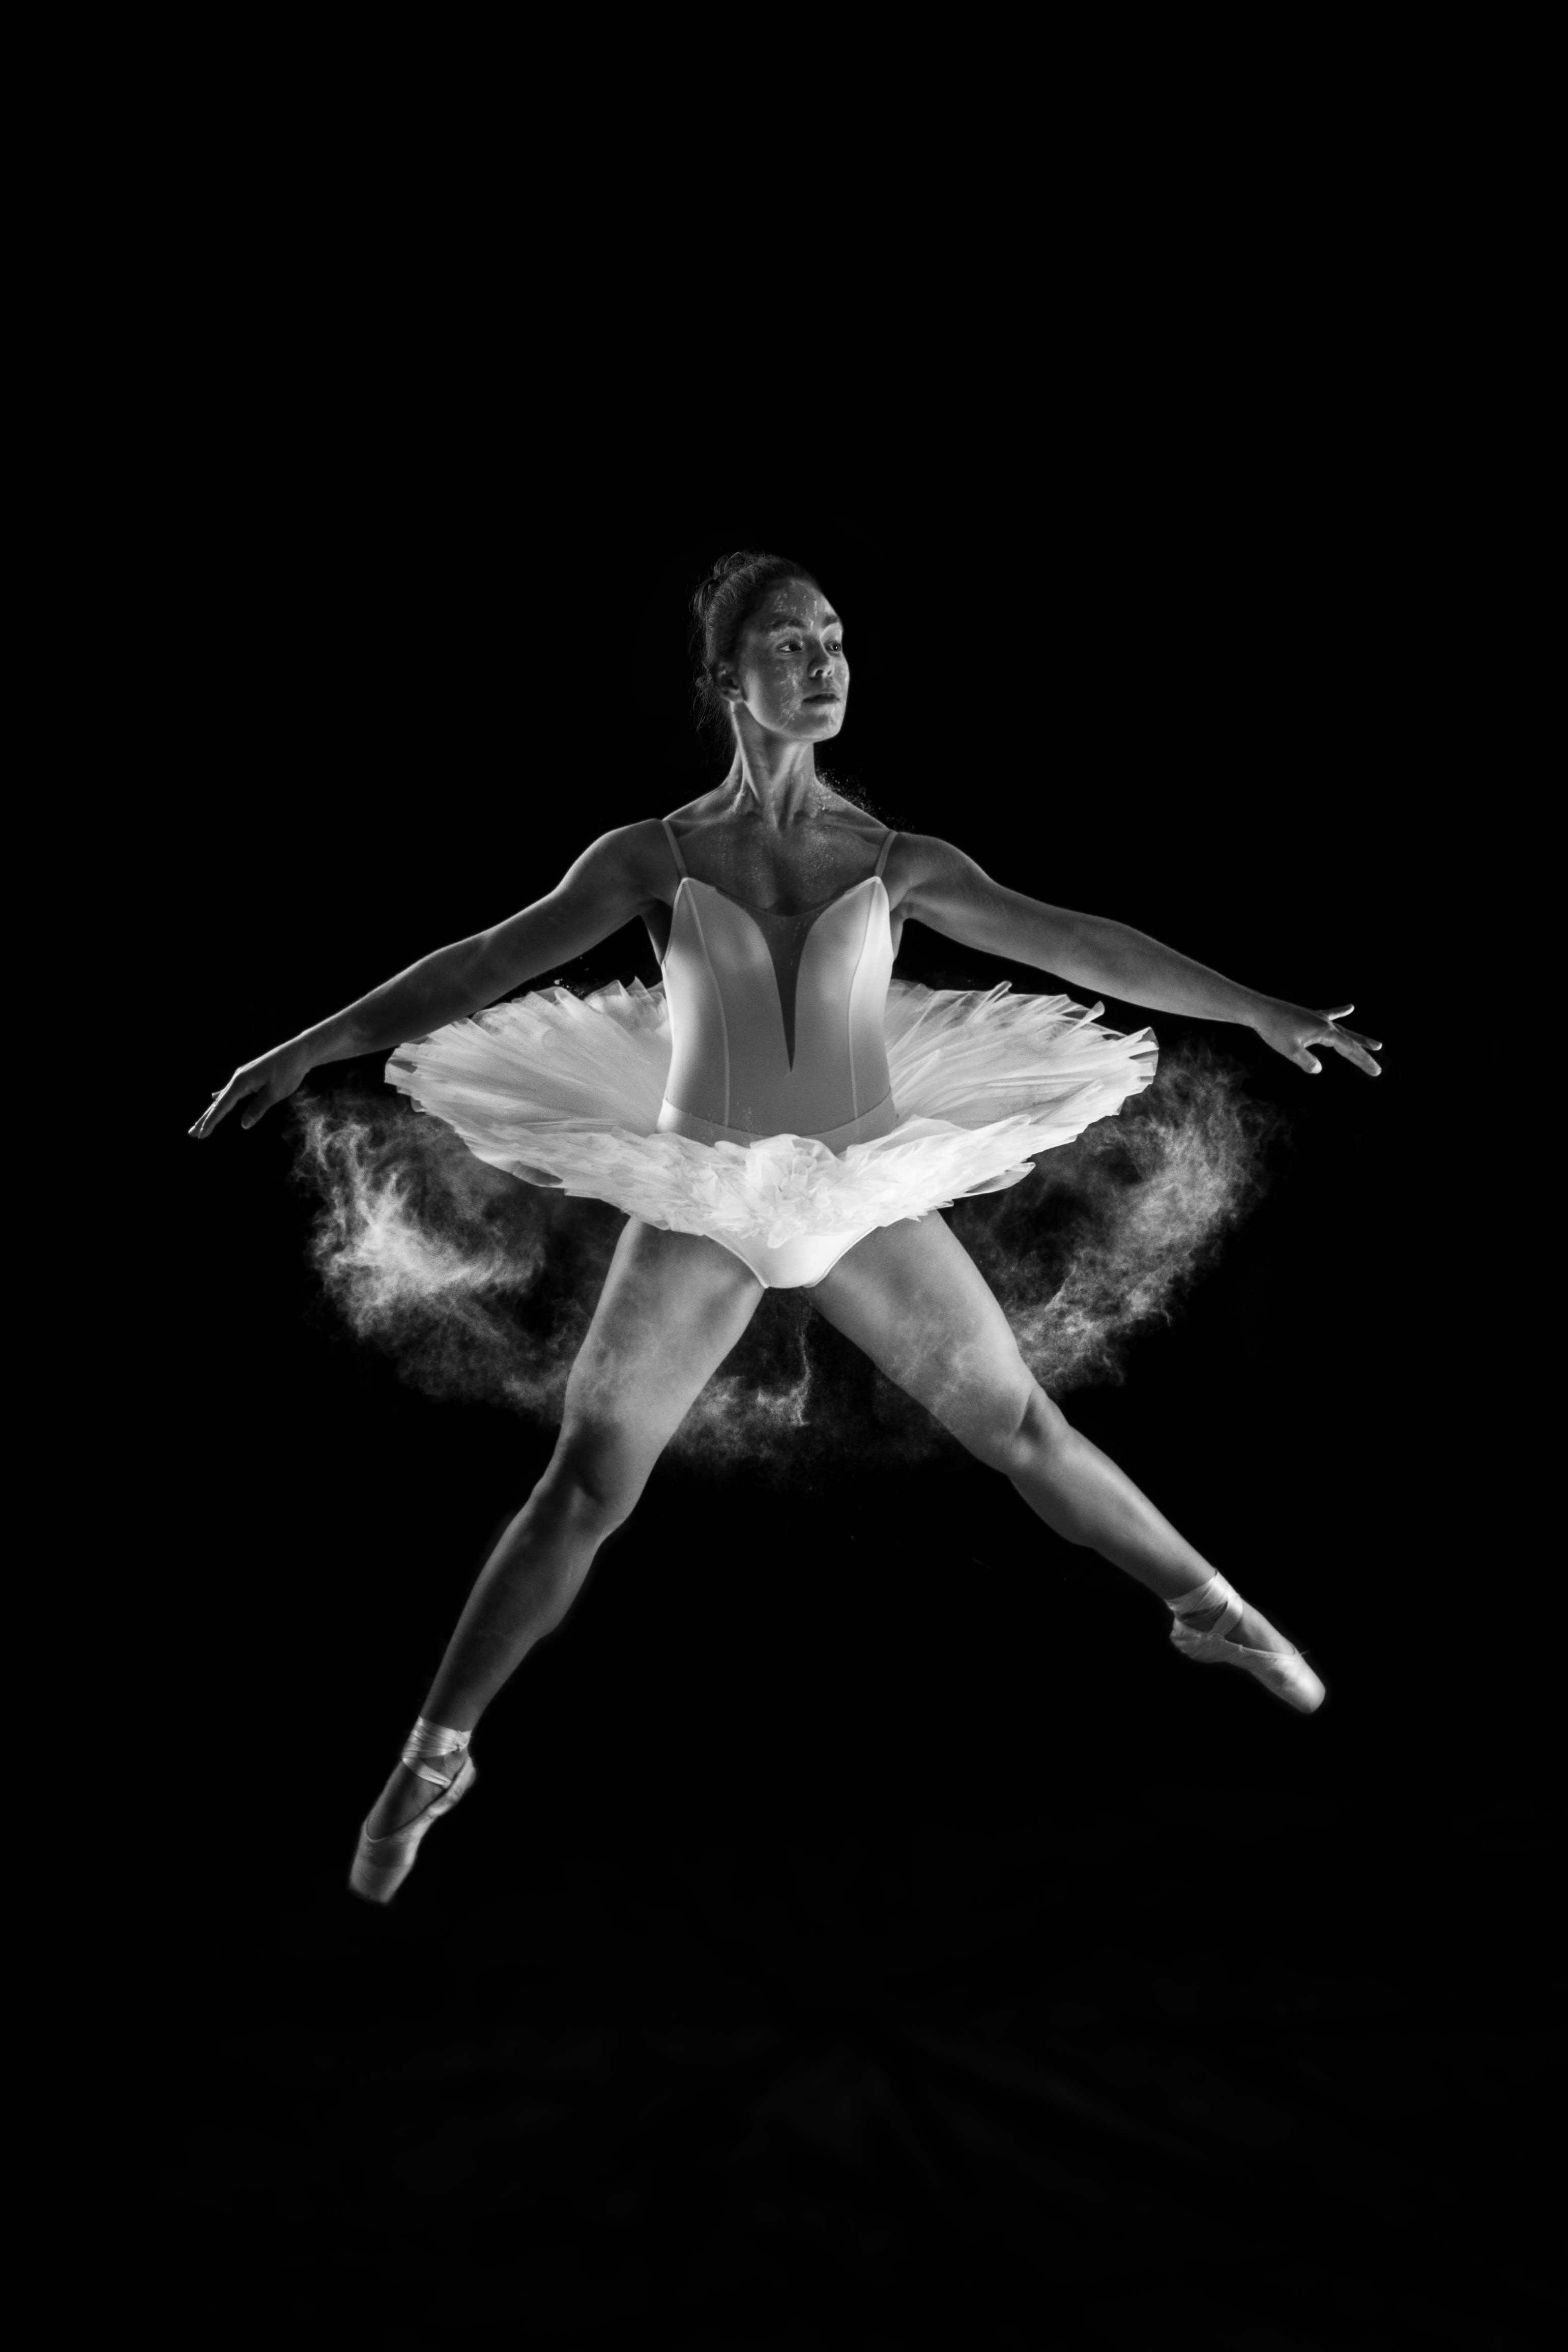 grayscale photography of woman doing ballet dancing